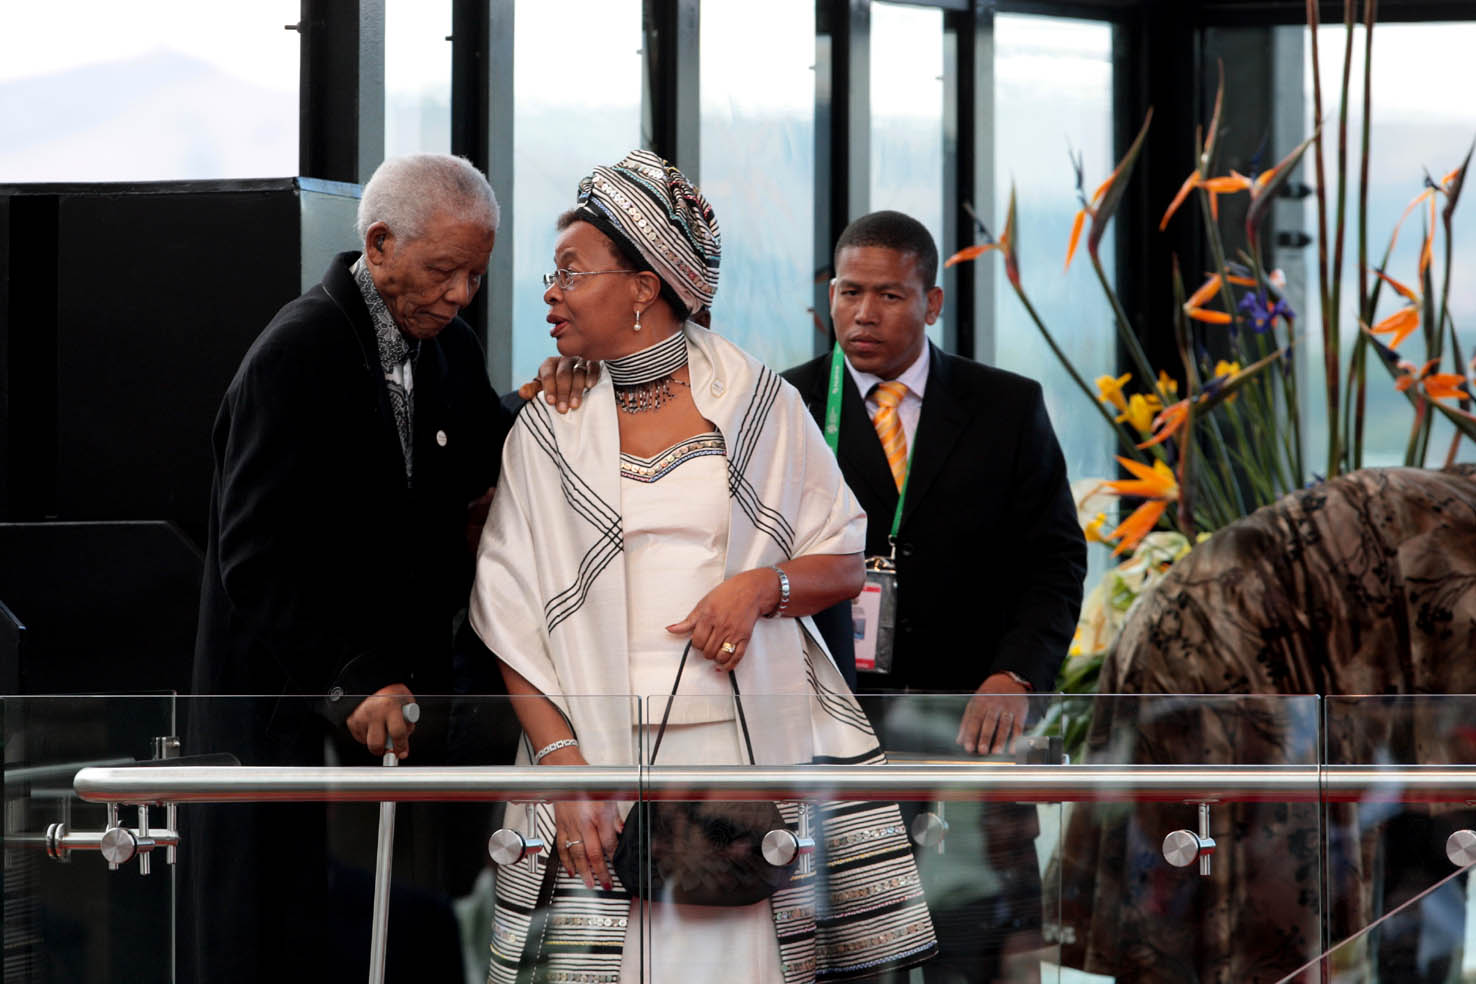 Nelson Mandela and his wife Graca seen at the inauguration of Jacob Zuma as president of South Africa by Chief Justice Pius Langa at the Union Buildings in Pretoria, May 9 2009.